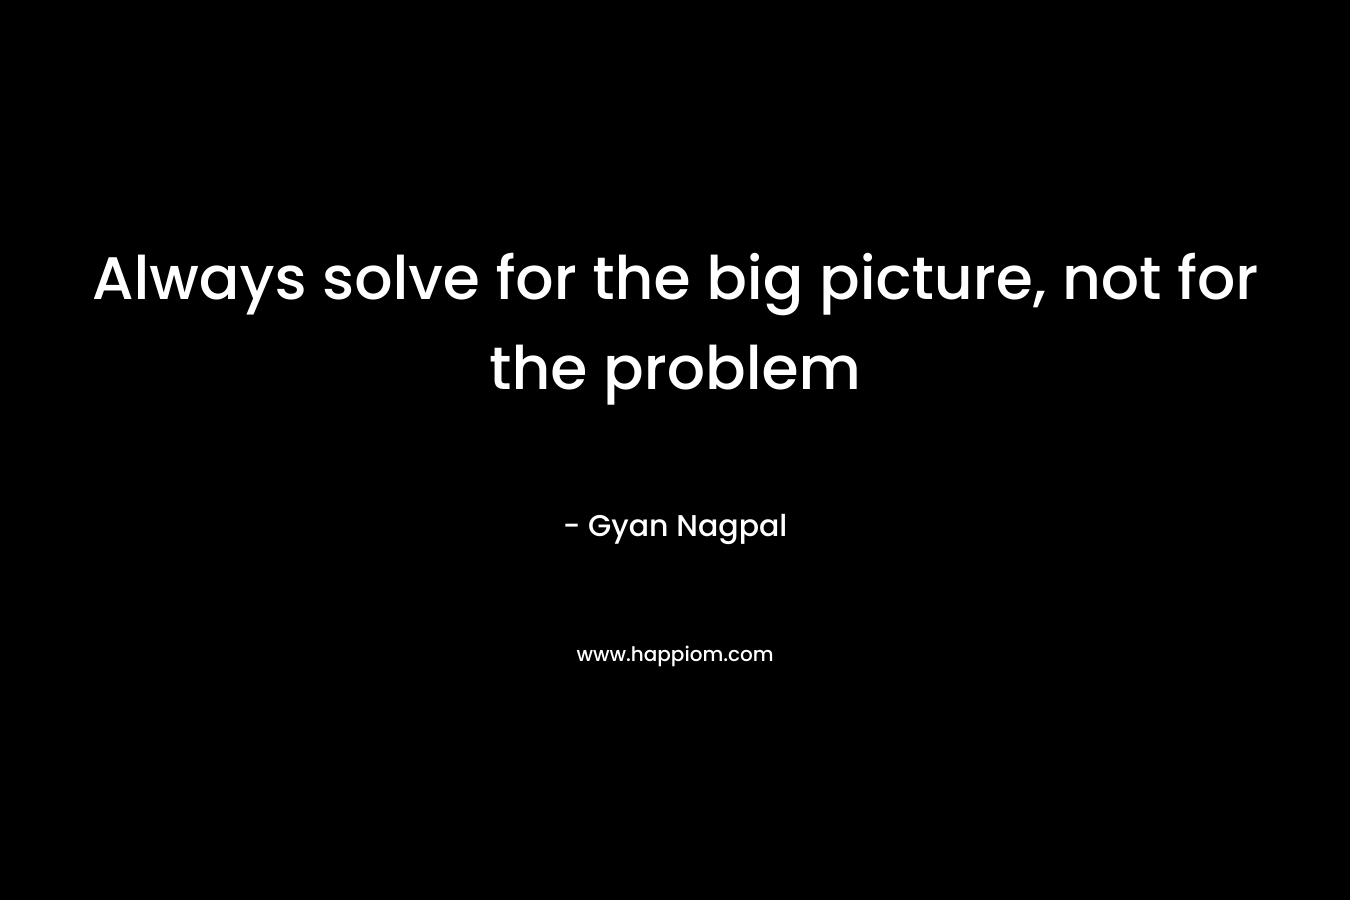 Always solve for the big picture, not for the problem